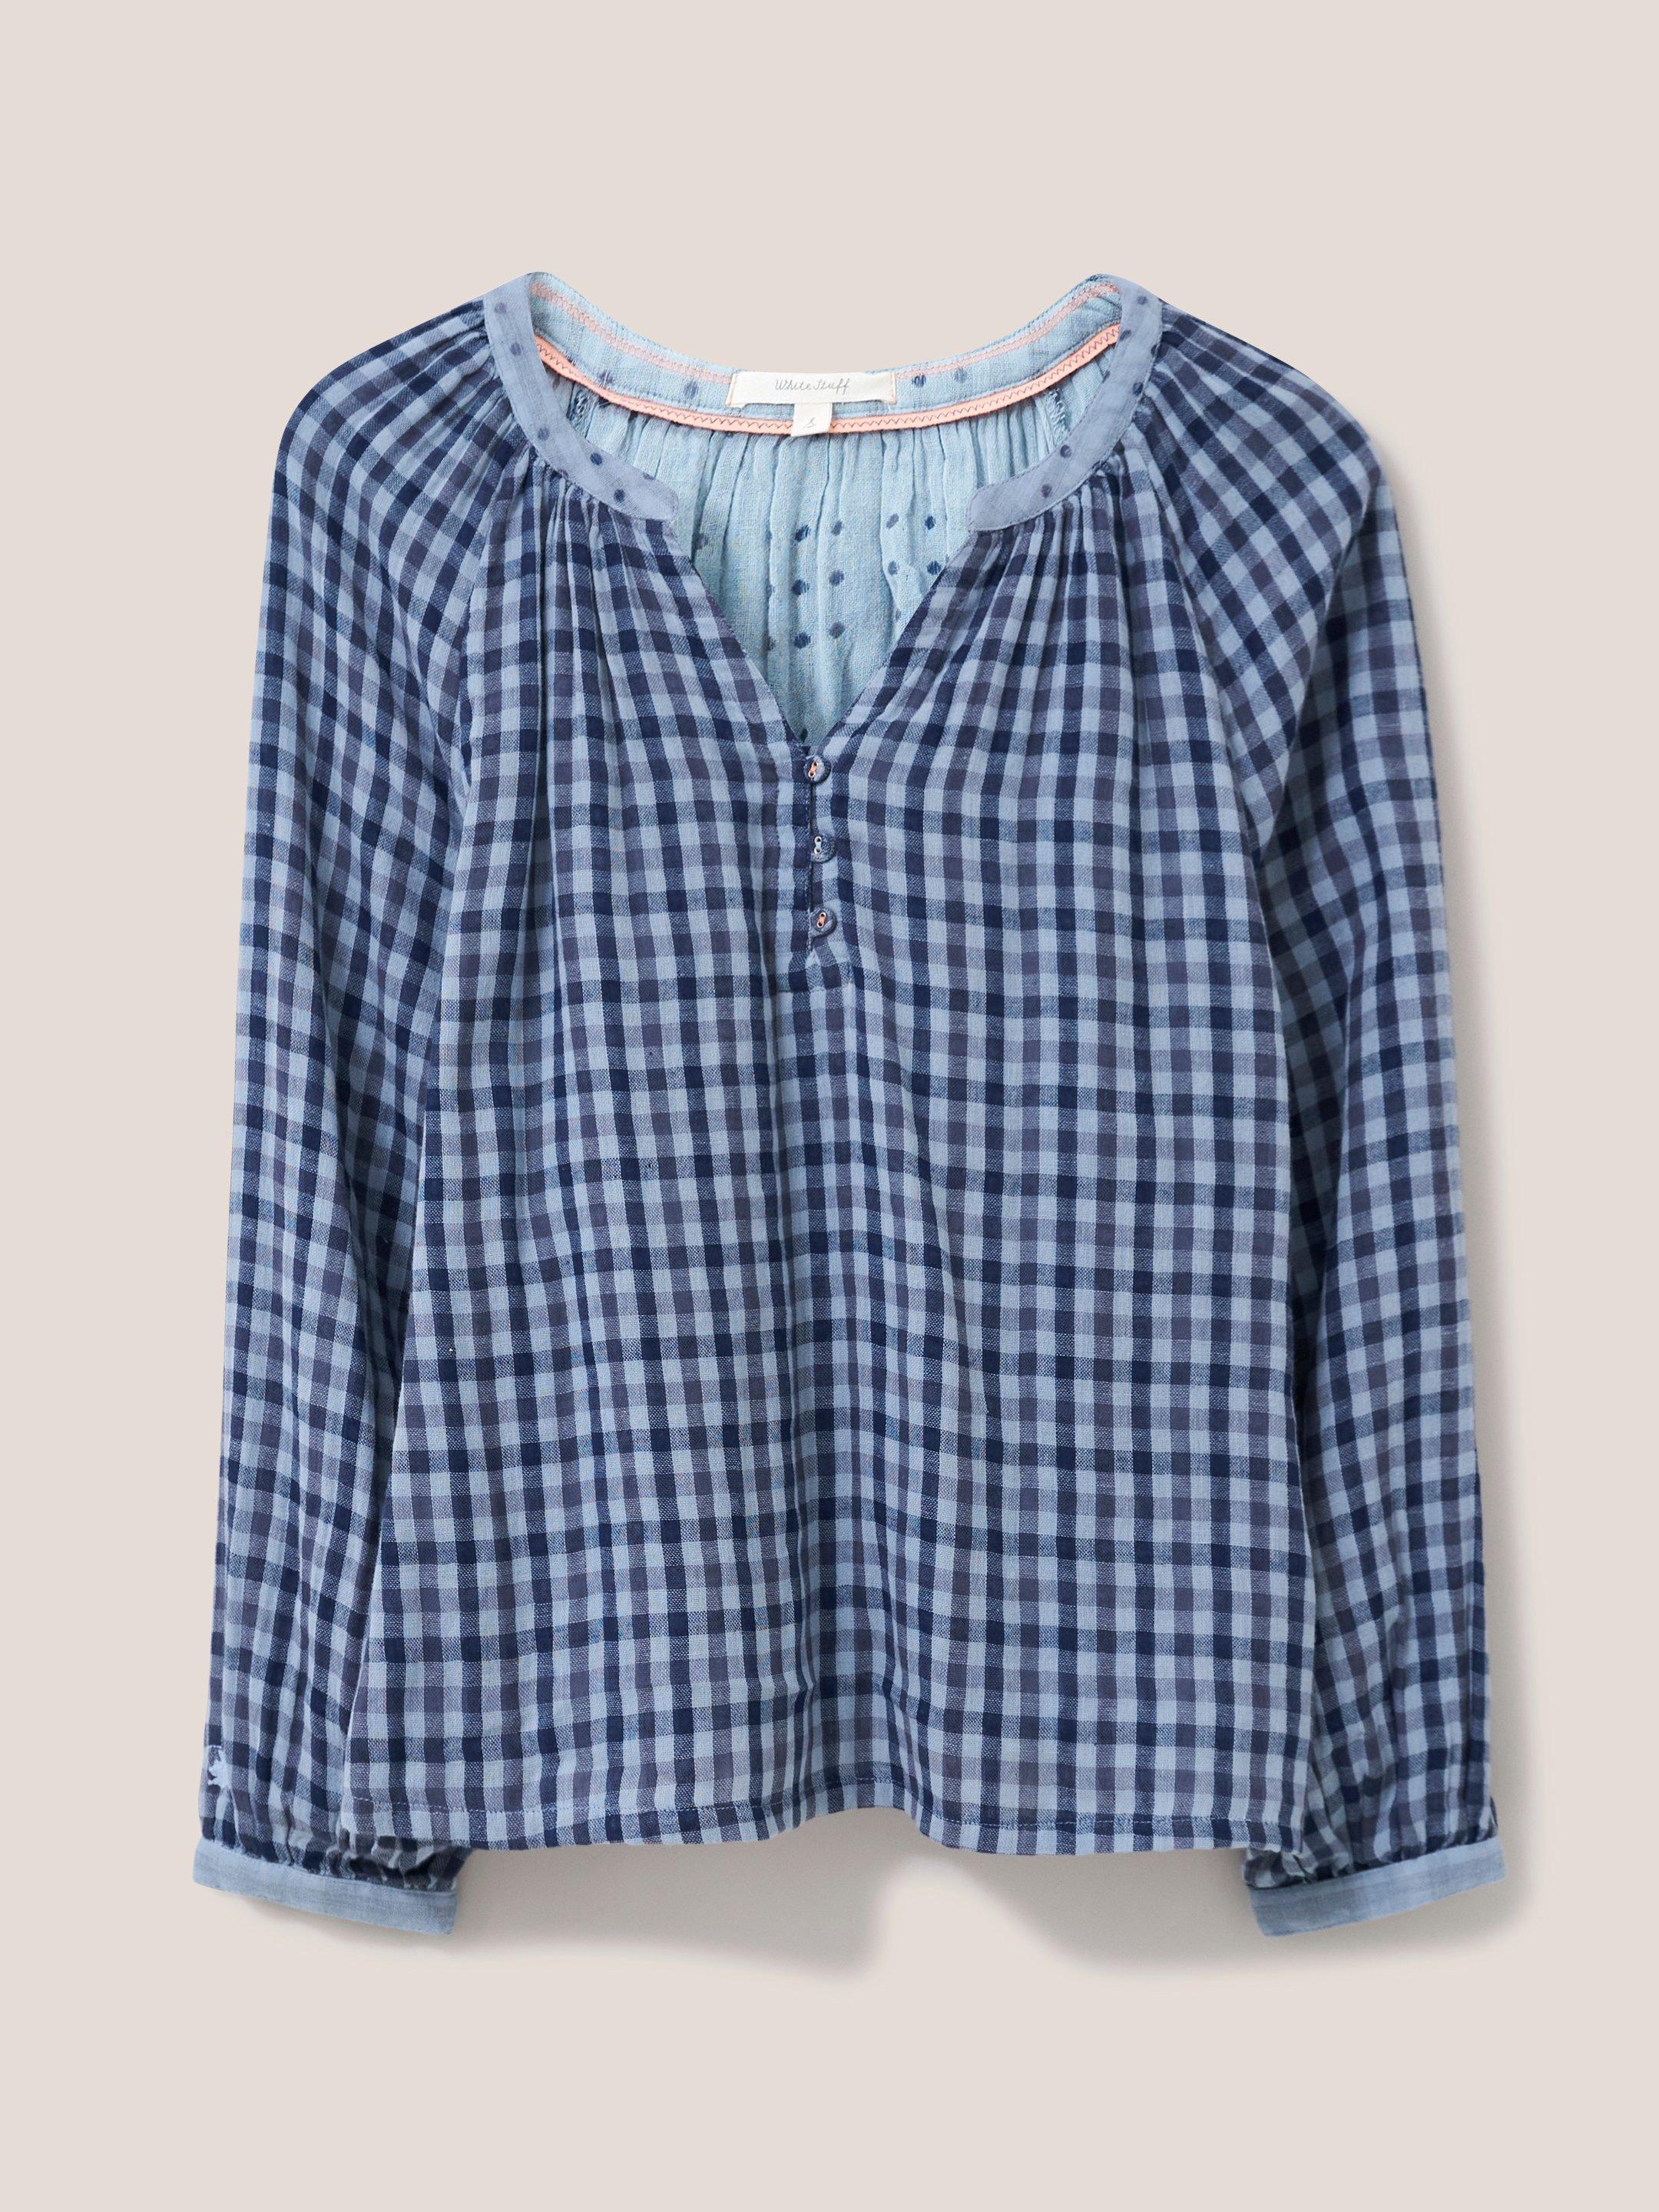 Nightsky Check PJ Top in BLUE MLT - FLAT FRONT